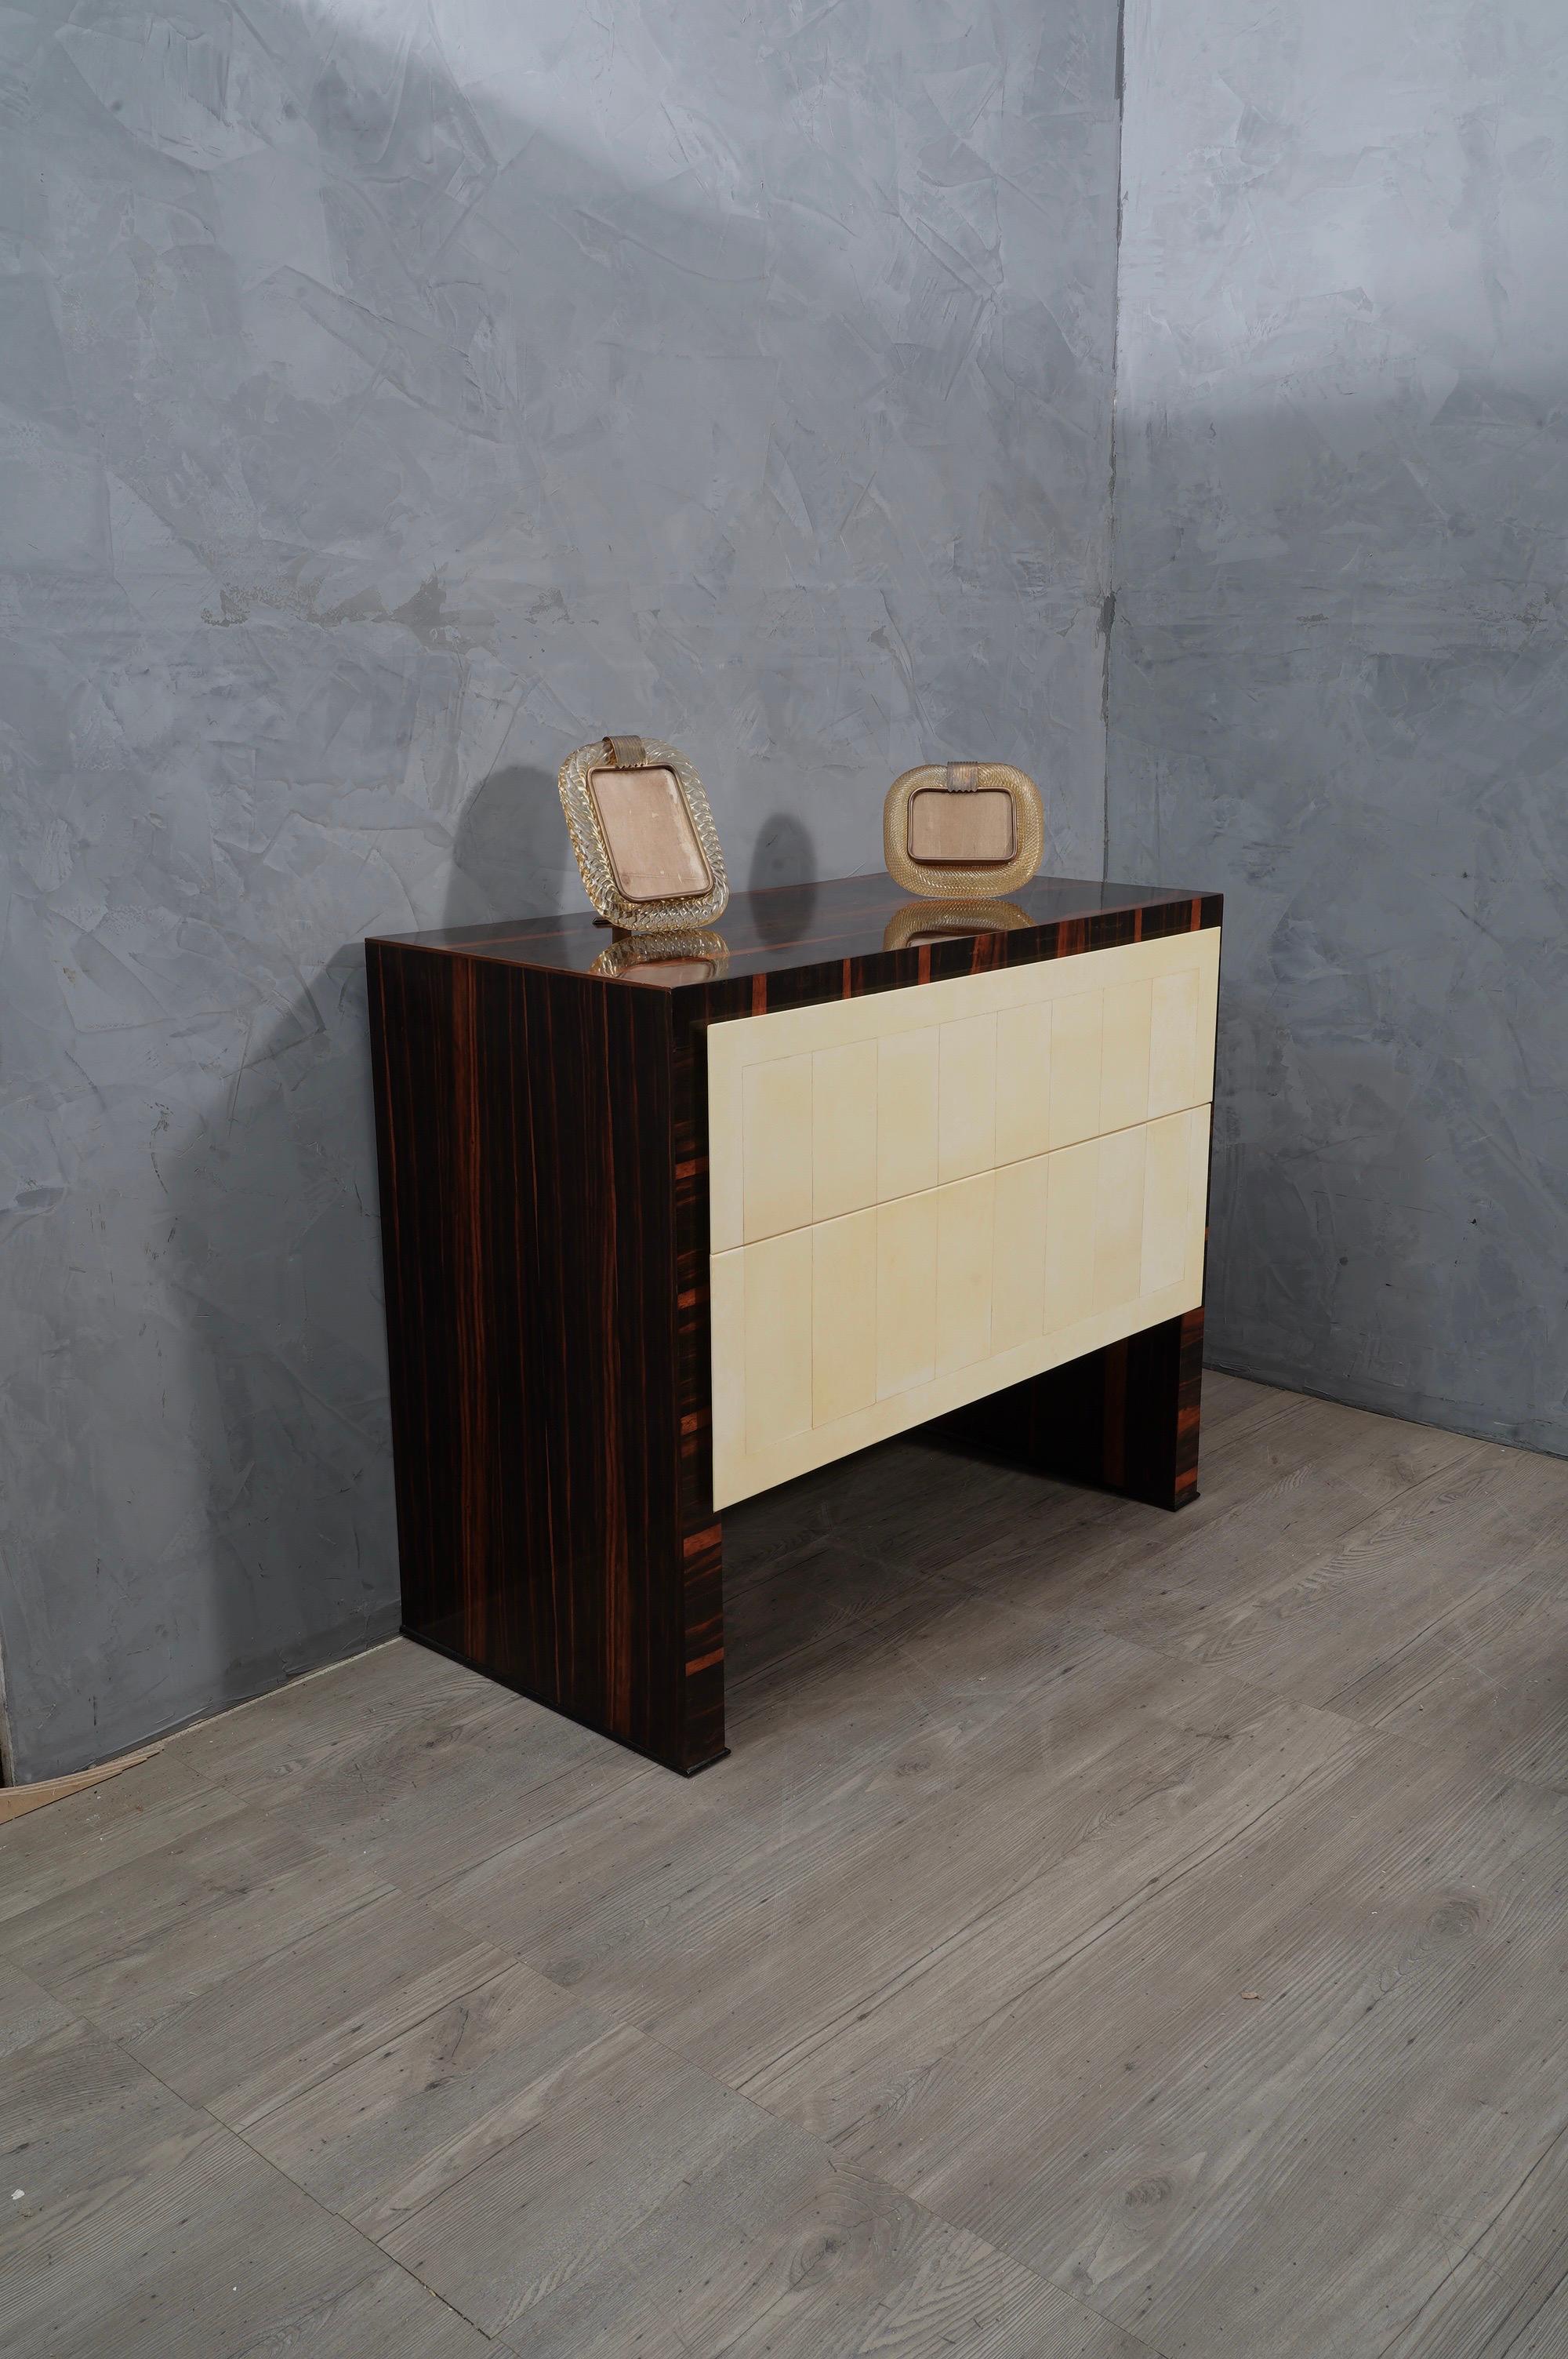 Perfect bedroom dresser all refinement and style both for the size of the entire design and for the utmost care taken for its entire finish.

A simple square design welcomes a Macassar wood veneer, with two front drawers covered in goatskin instead.